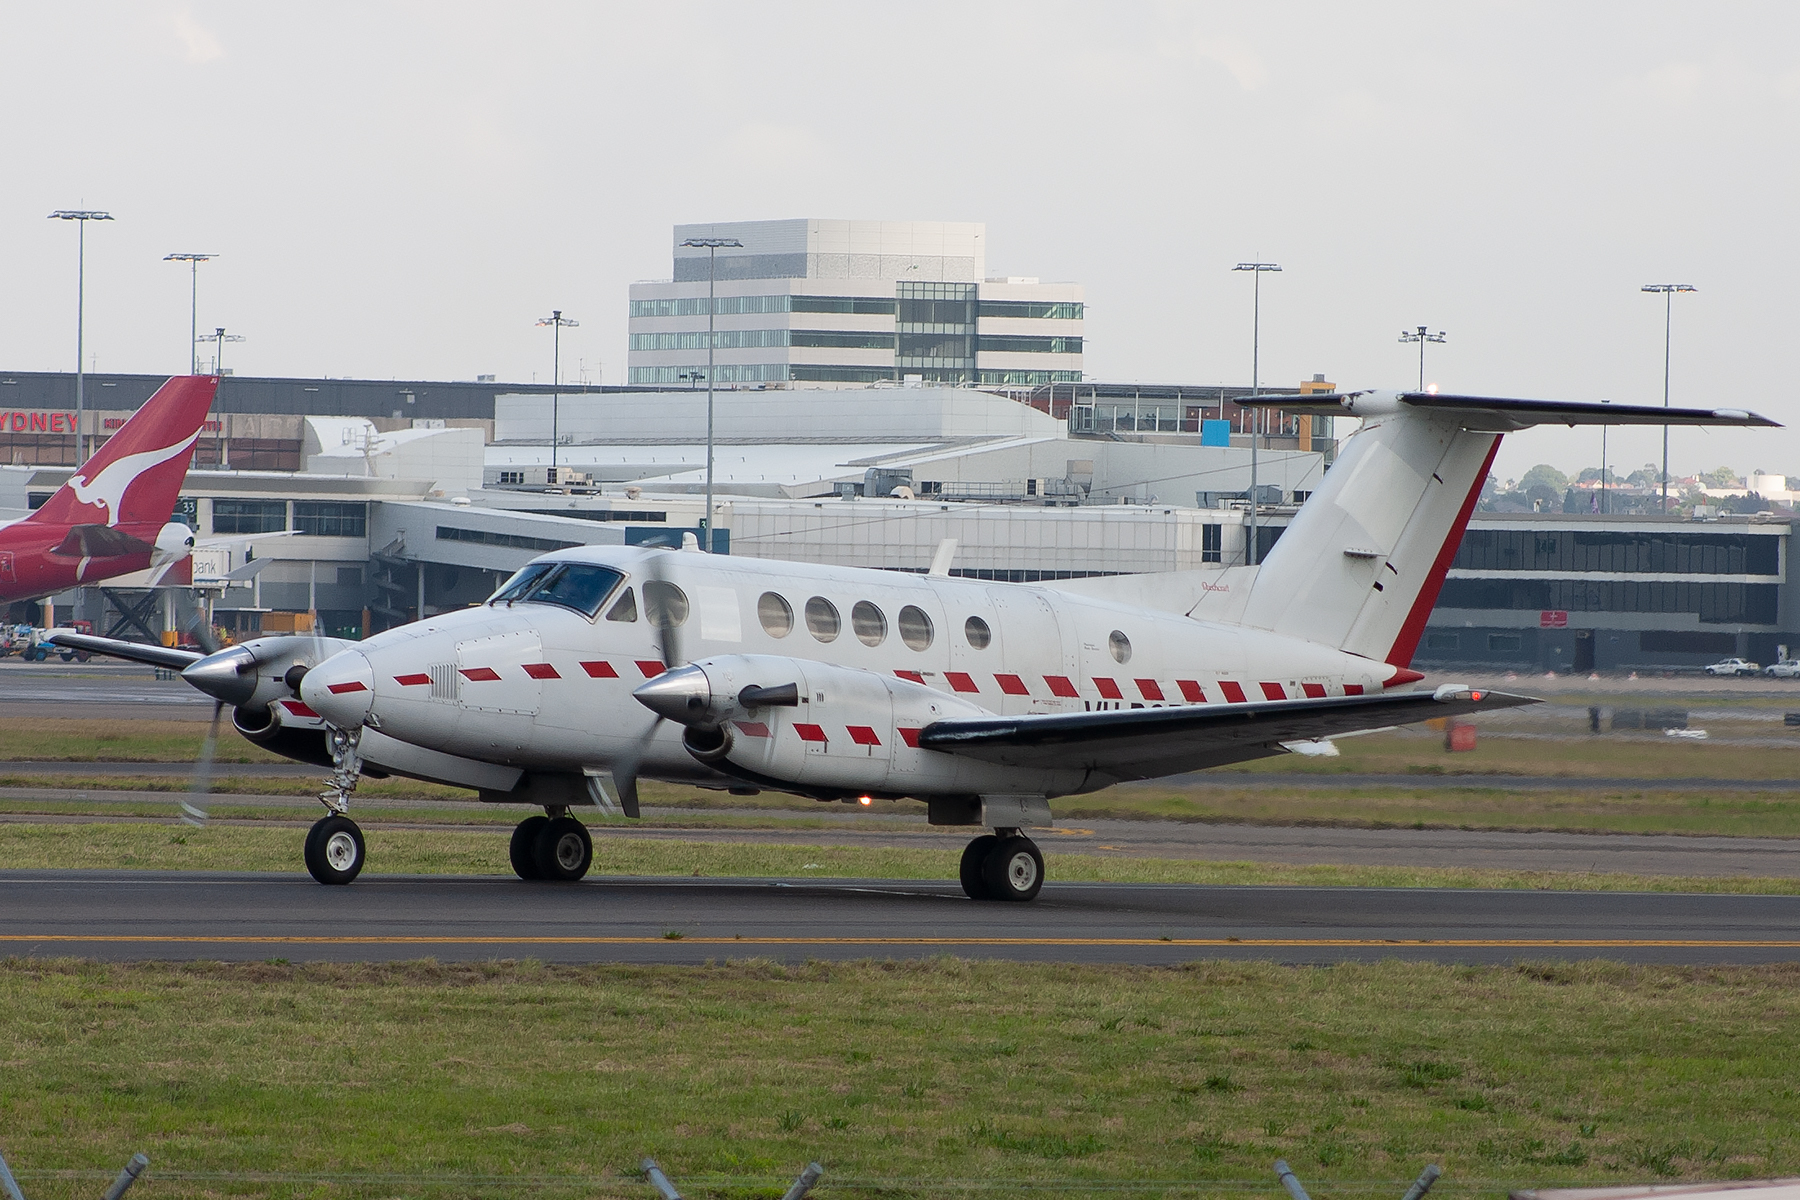 RFDS - Royal Flying Doctor Service Beech King Air 200C VH-BQR at Kingsford Smith